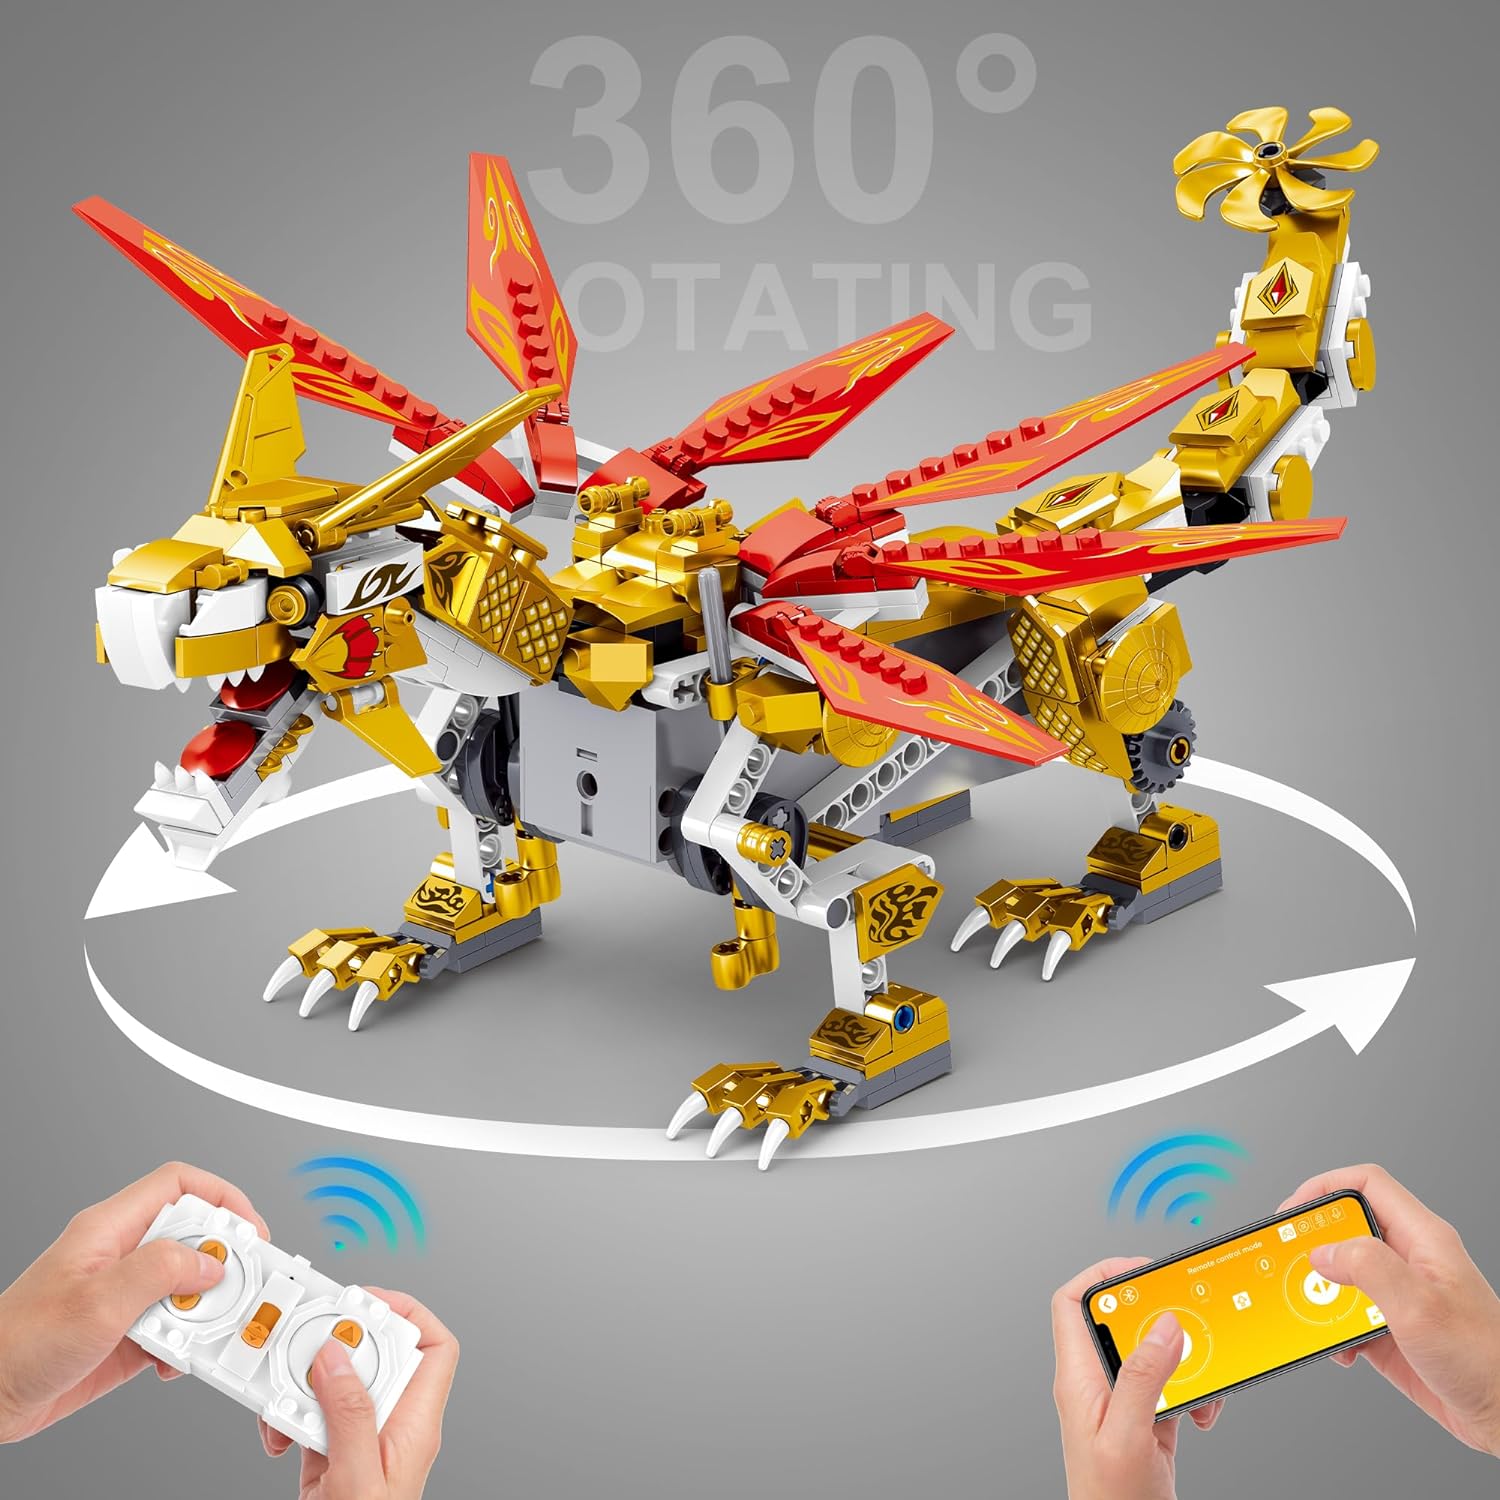 Educiro Remote & APP Control Dragon Building Kit(512Pcs) ,STEM Projects for Kids Age 8-12 , Educational Birthday Gifts for 7 8 9 10 11 12-15 Years Old Boys Girls